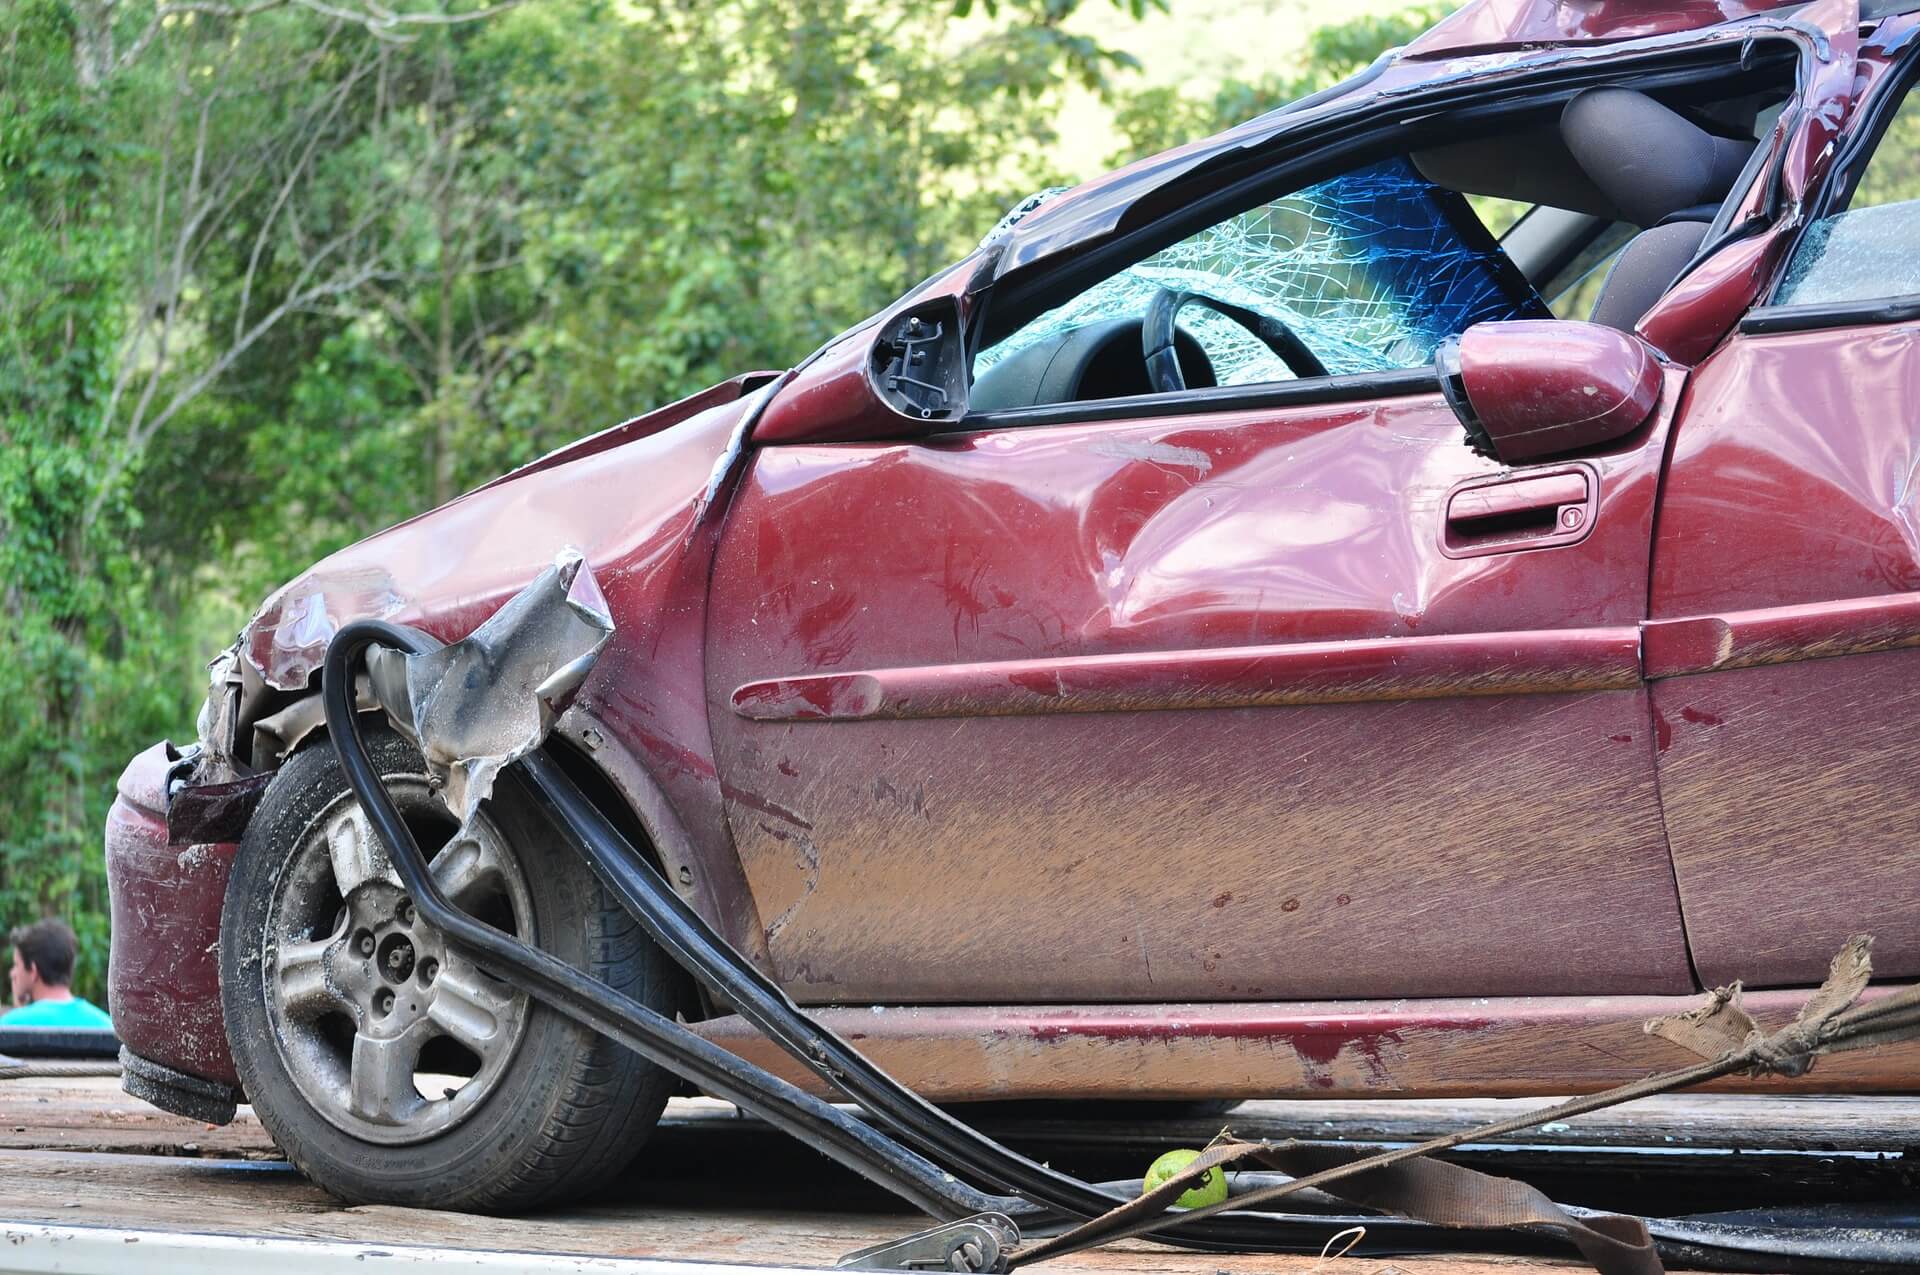 A maroon sedan is wrecked in an accident